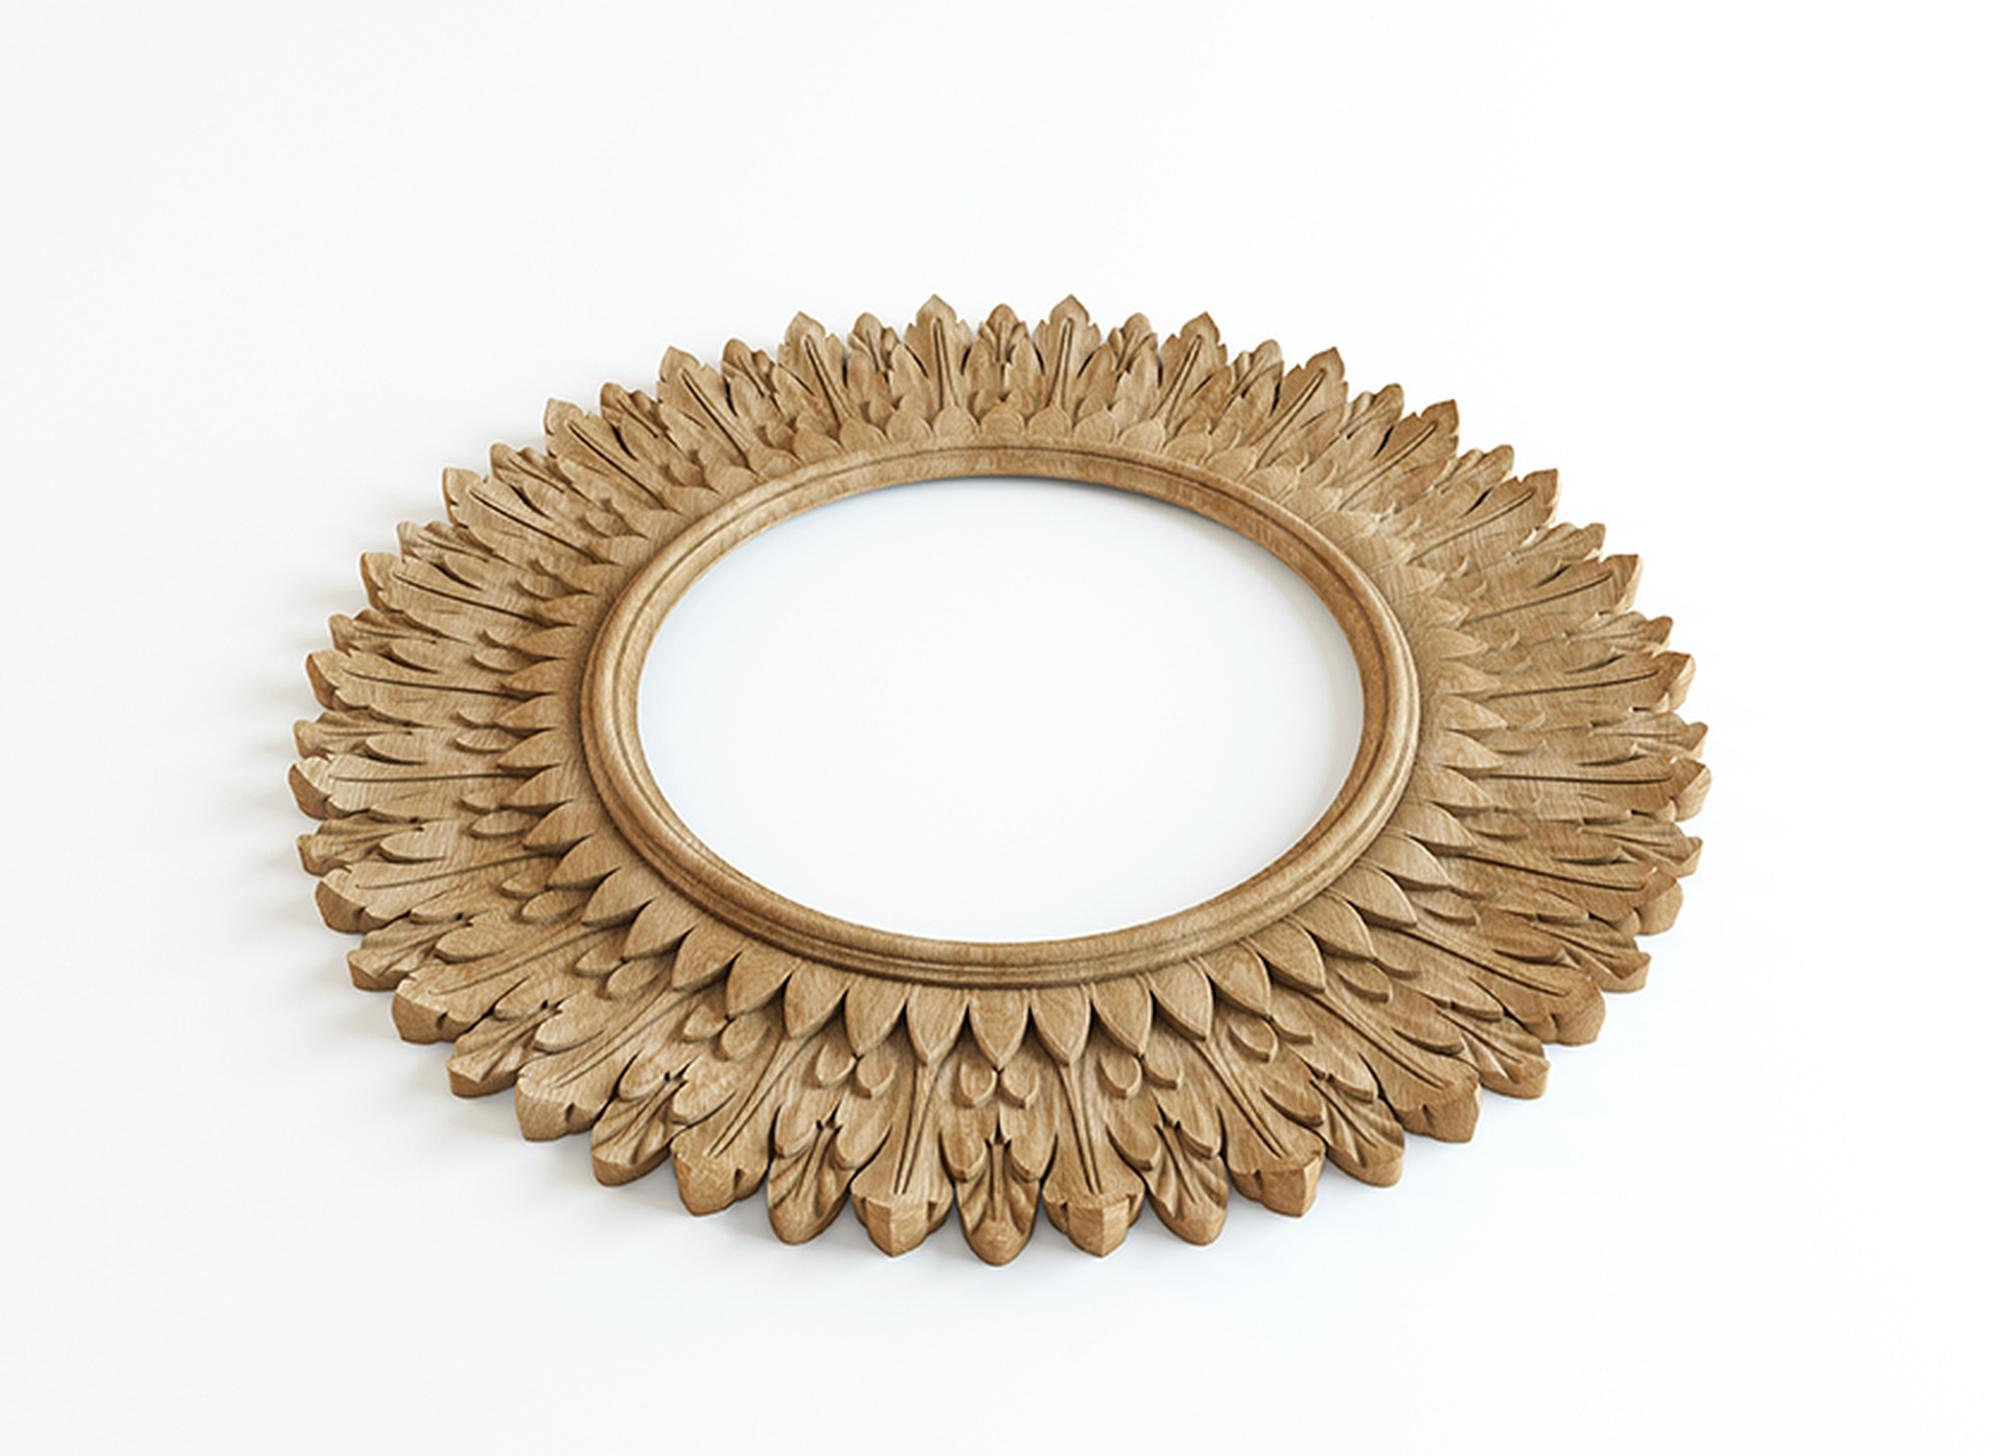 Unfinished High quality wood carving mirror frame from oak or beech of your choice.

>> SKU: RM-026

>> Dimensions (A x B x C x d):

- 35.43